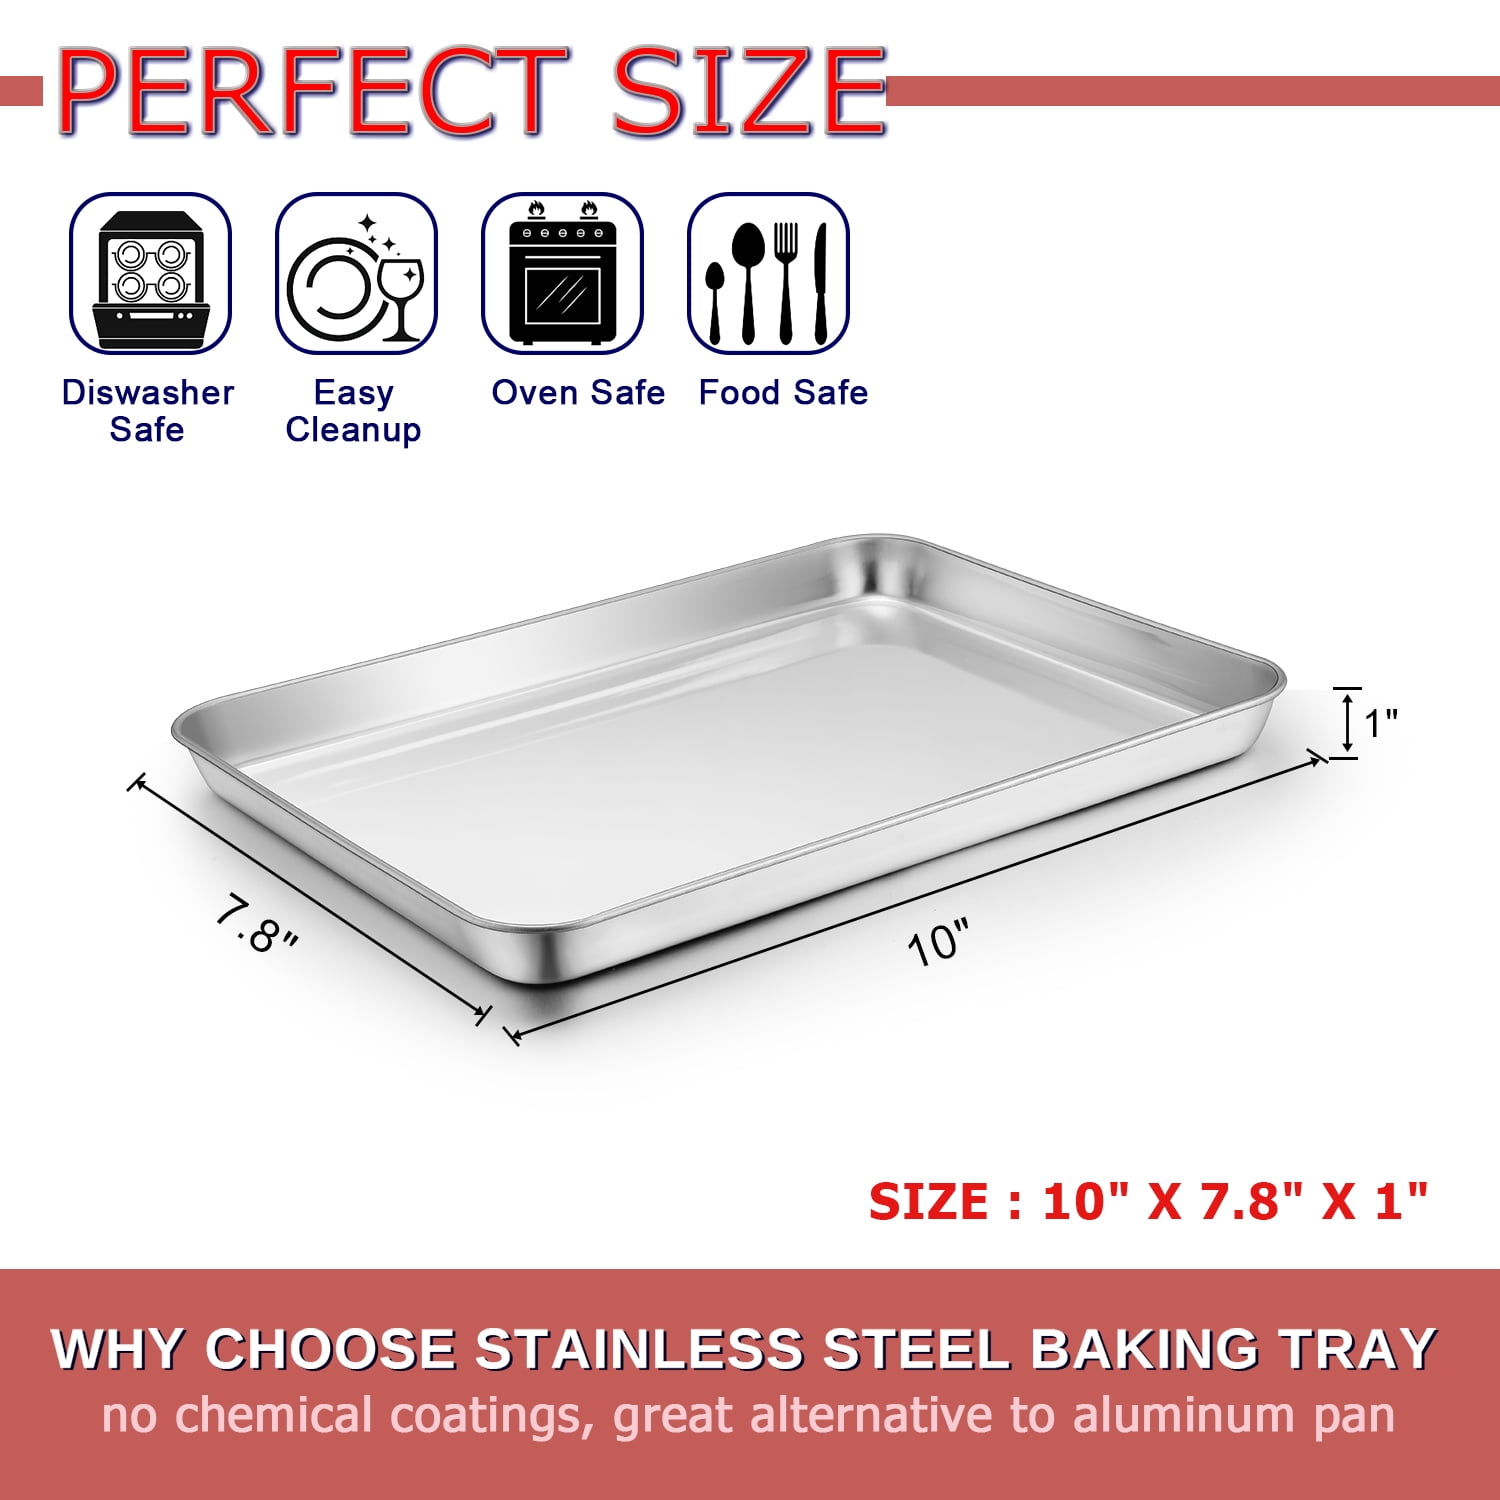 Vesteel 20 inch x 14 inch x 1 inch Extra Large Baking Sheet Set of 2, Heavy Duty Stainless Steel Cookie Sheet Baking Pan for Oven, Non-Stick 